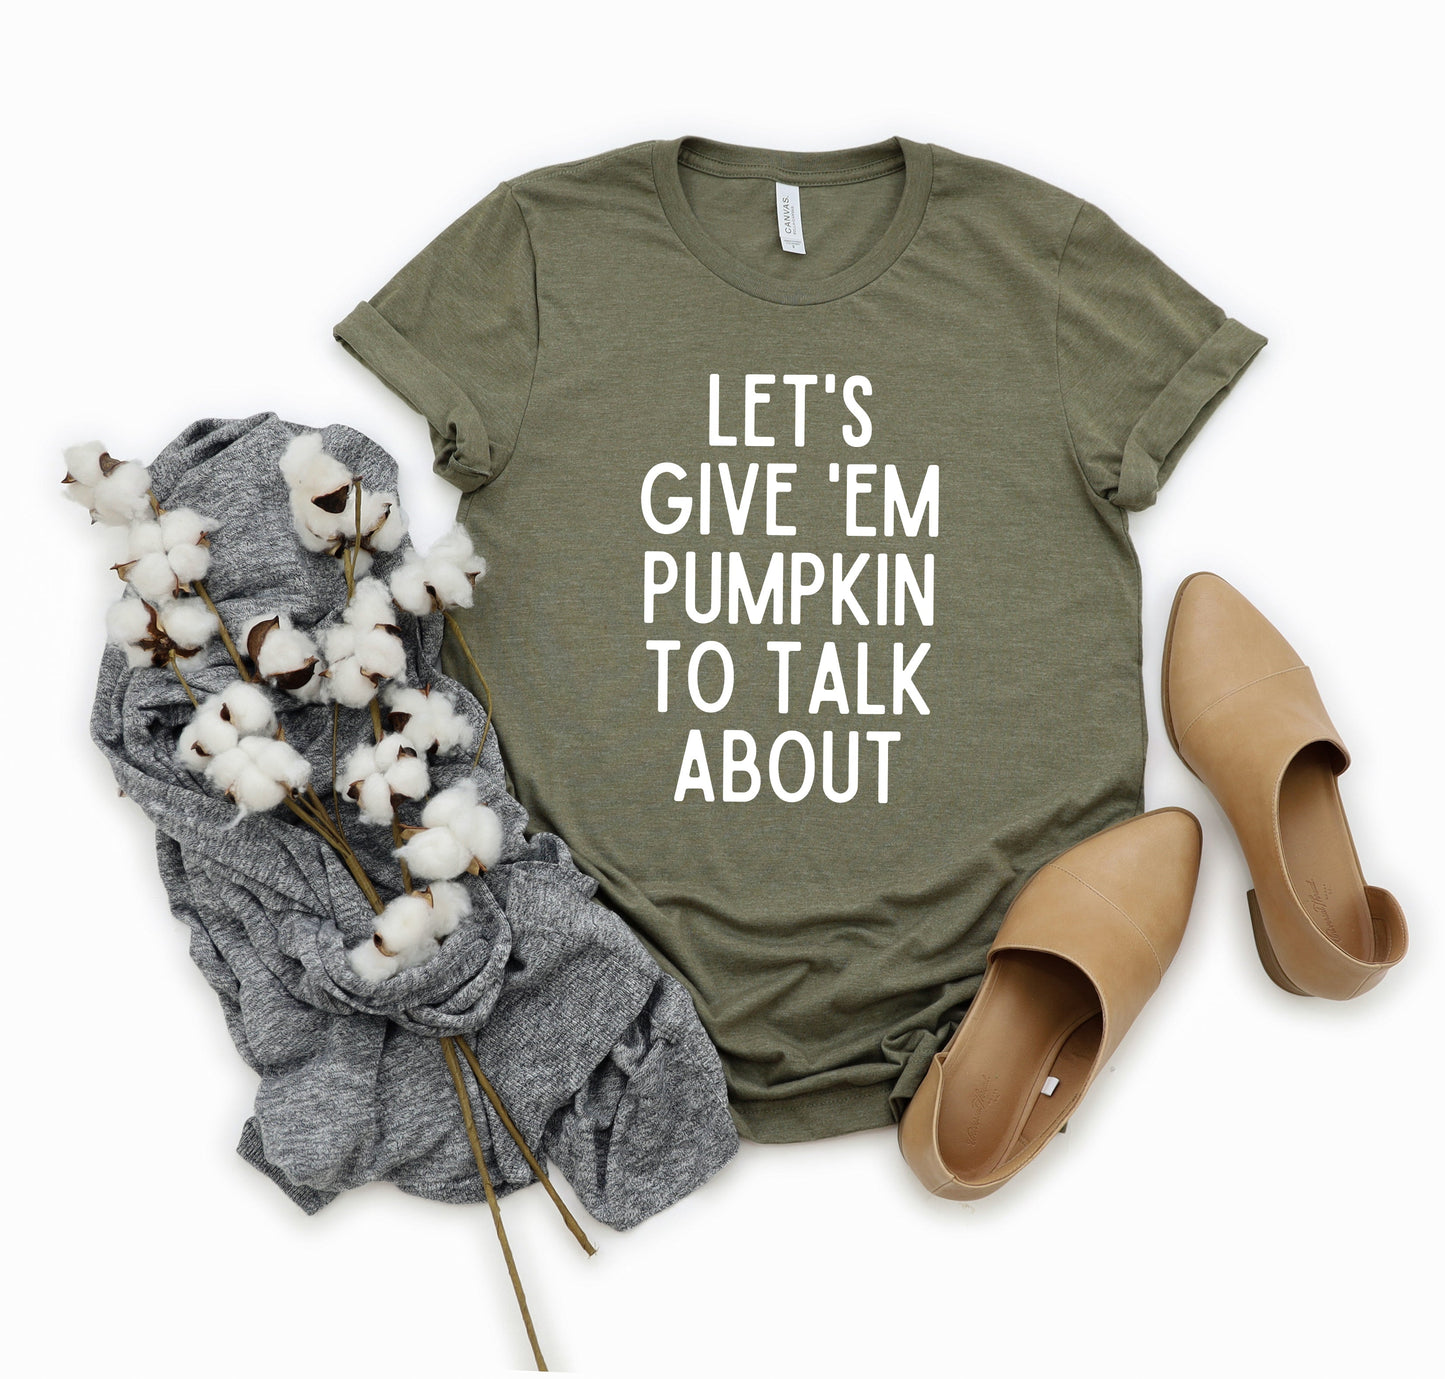 Let's Give 'Em Pumpkin To Talk About | Short Sleeve Crew Neck